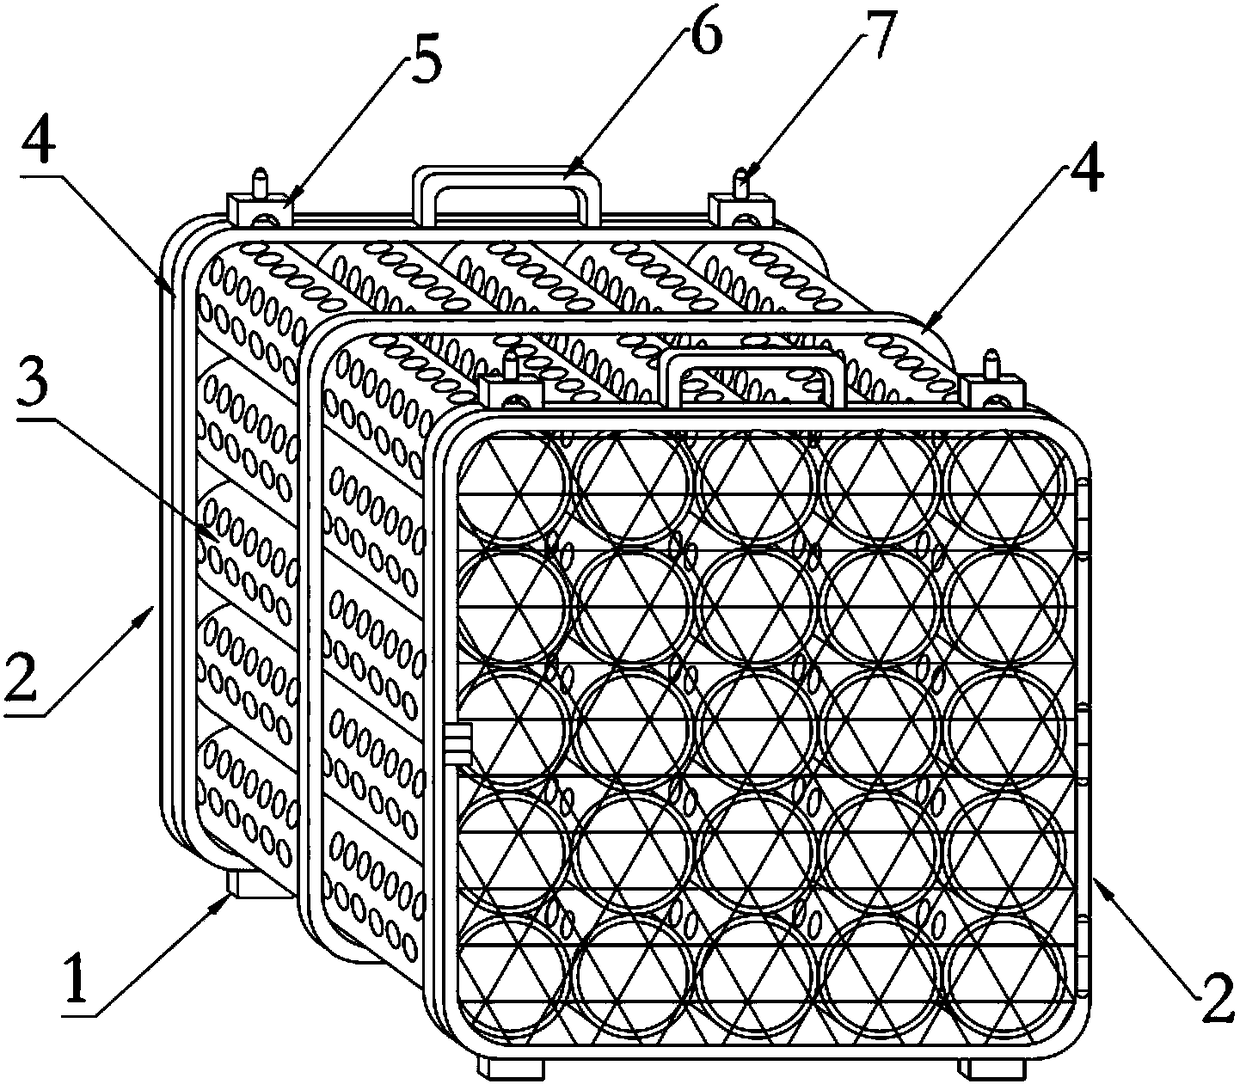 Device for temporary rearing and transporting of lobsters